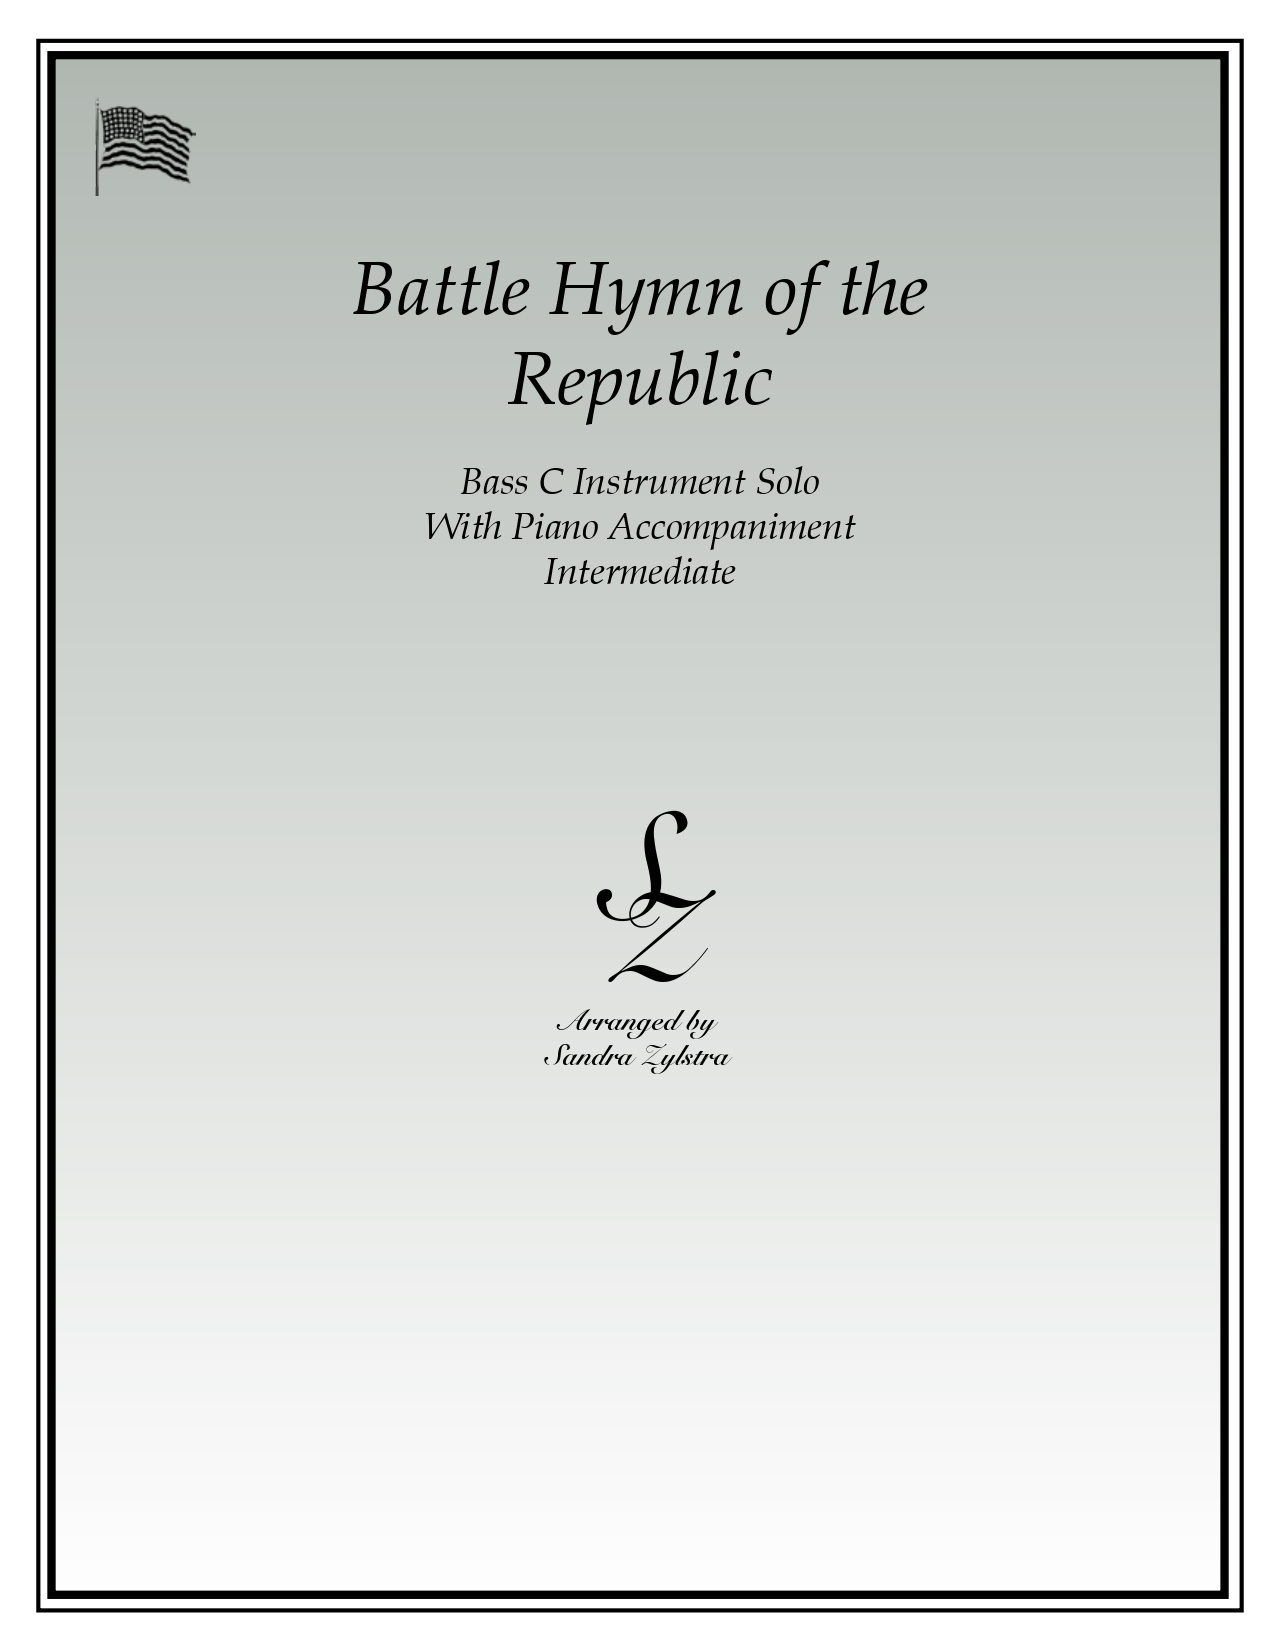 Battle Hymn Of The Republic bass C instrument solo part cover page 00011